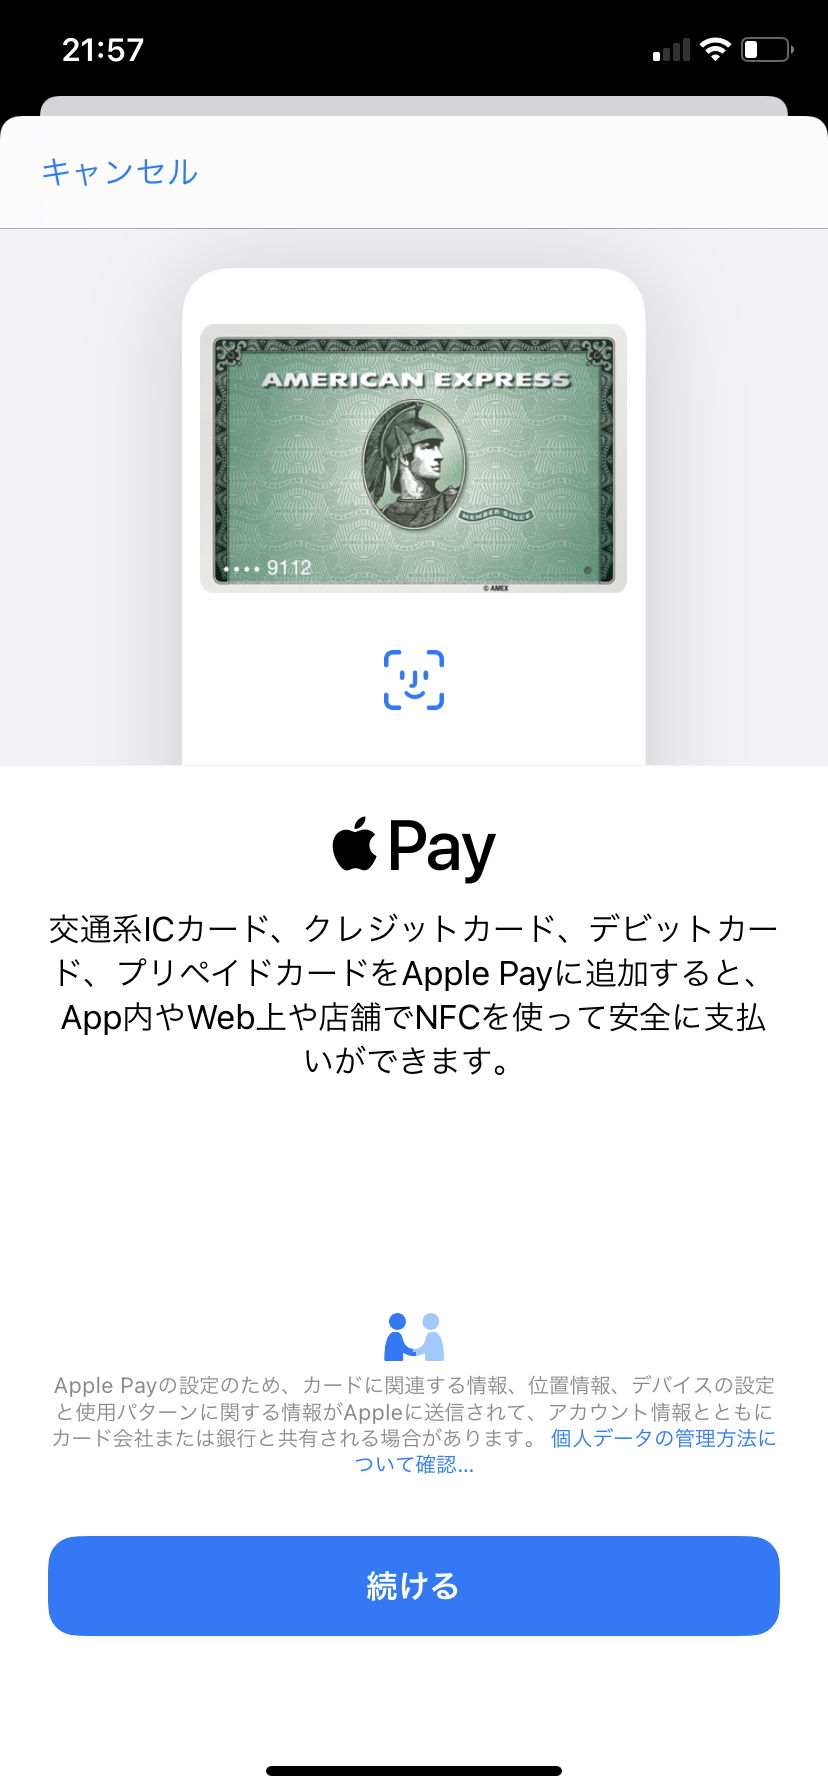 Wallet→PASMOを選択